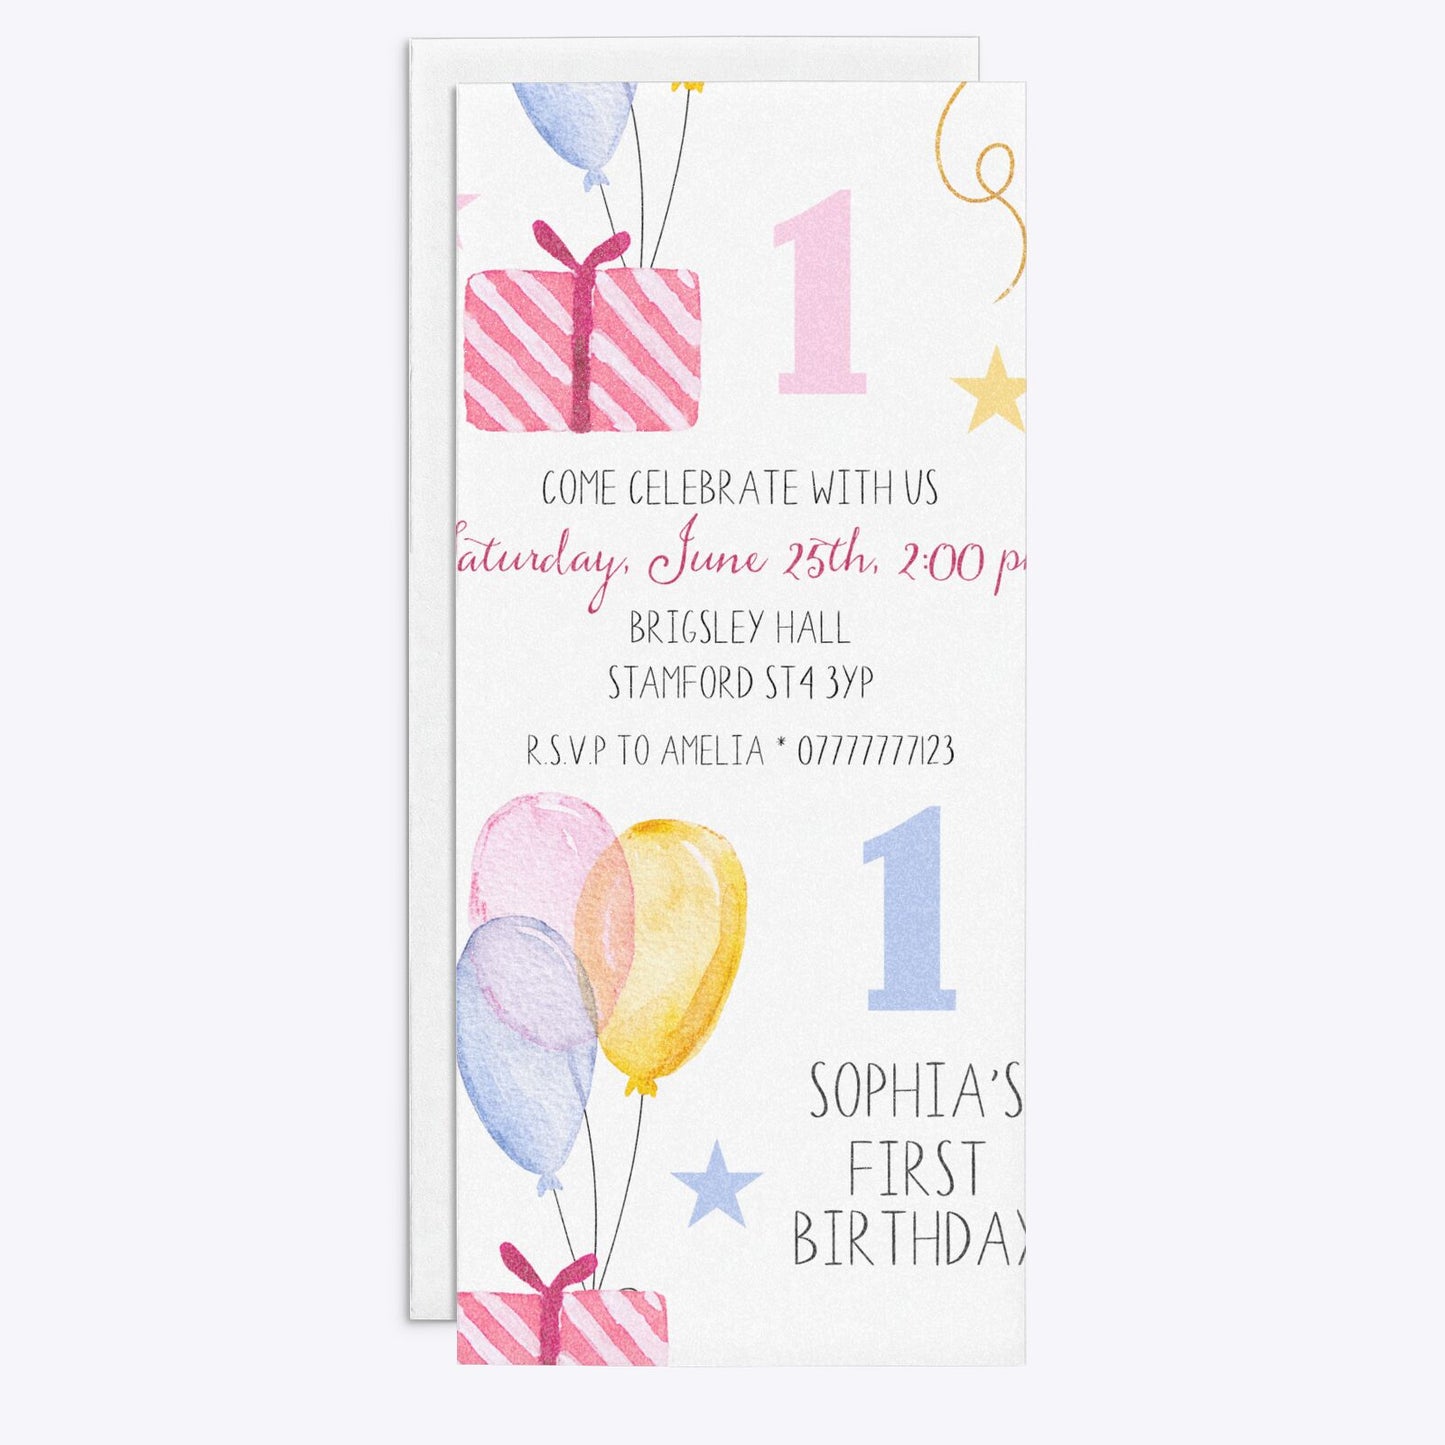 Personalised Girls First Birthday 4x9 Rectangle Invitation Glitter Front and Back Image